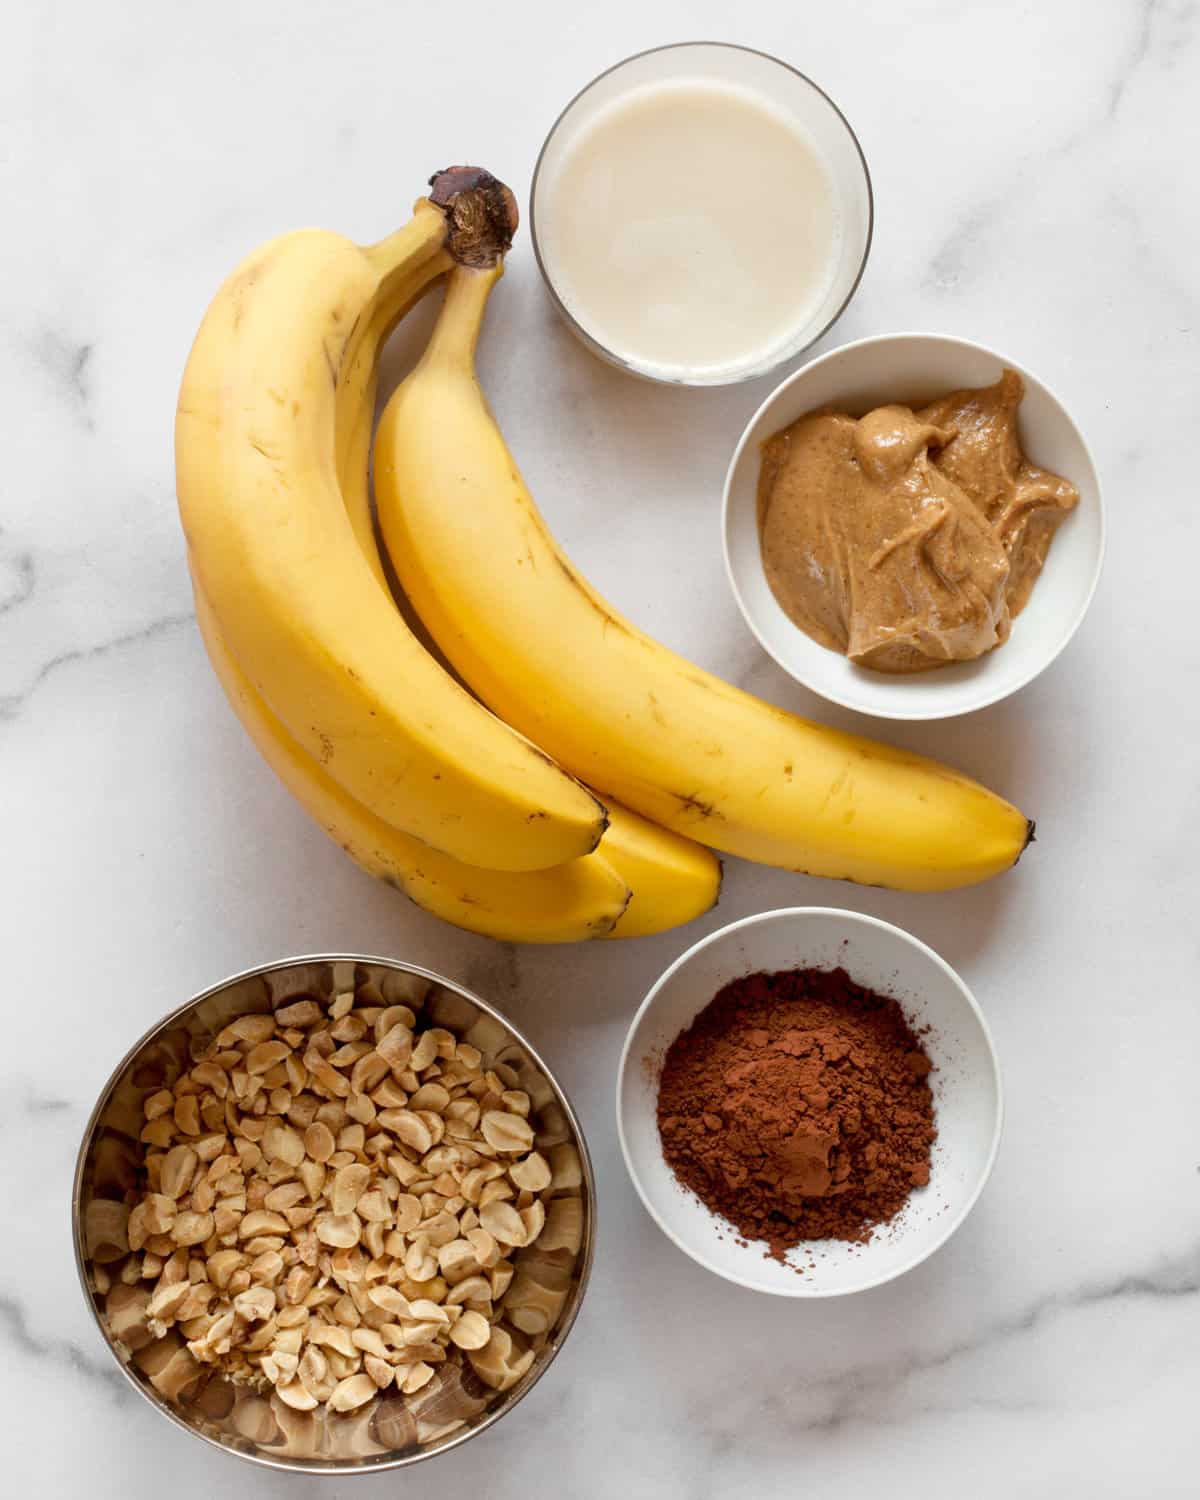 Ingredients including bananas, milk, peanut butter, cocoa powder and chopped peanuts.